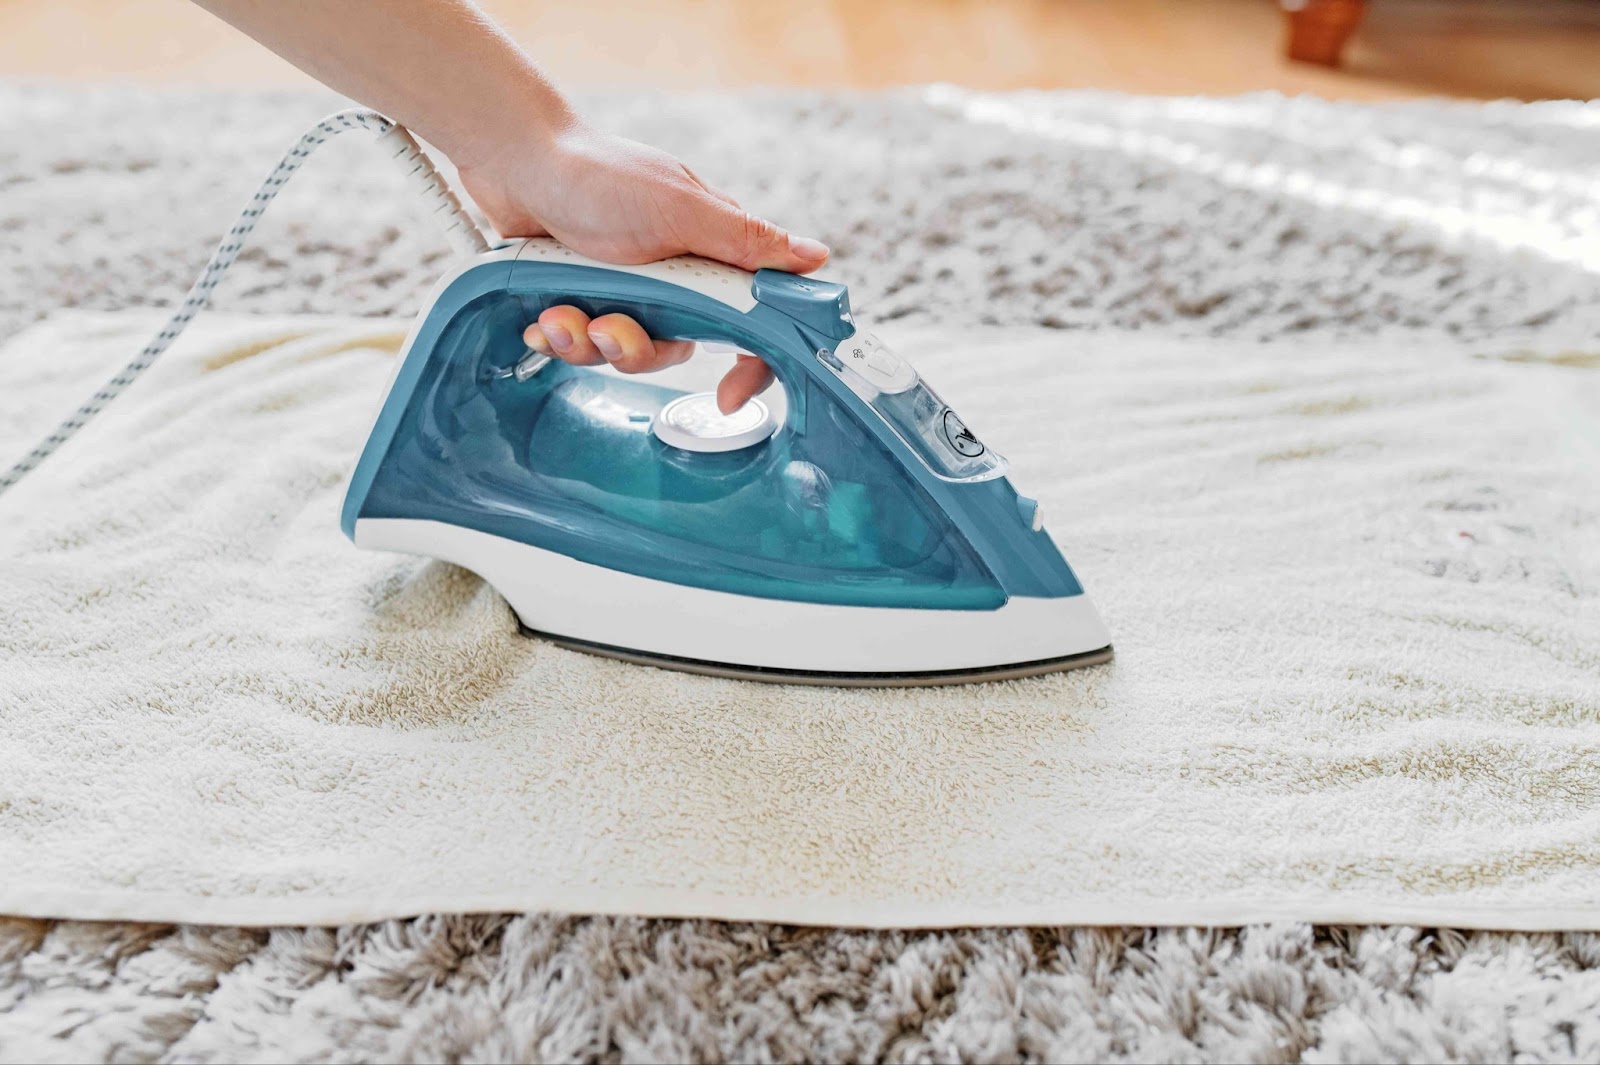 Ways to clean your carpet